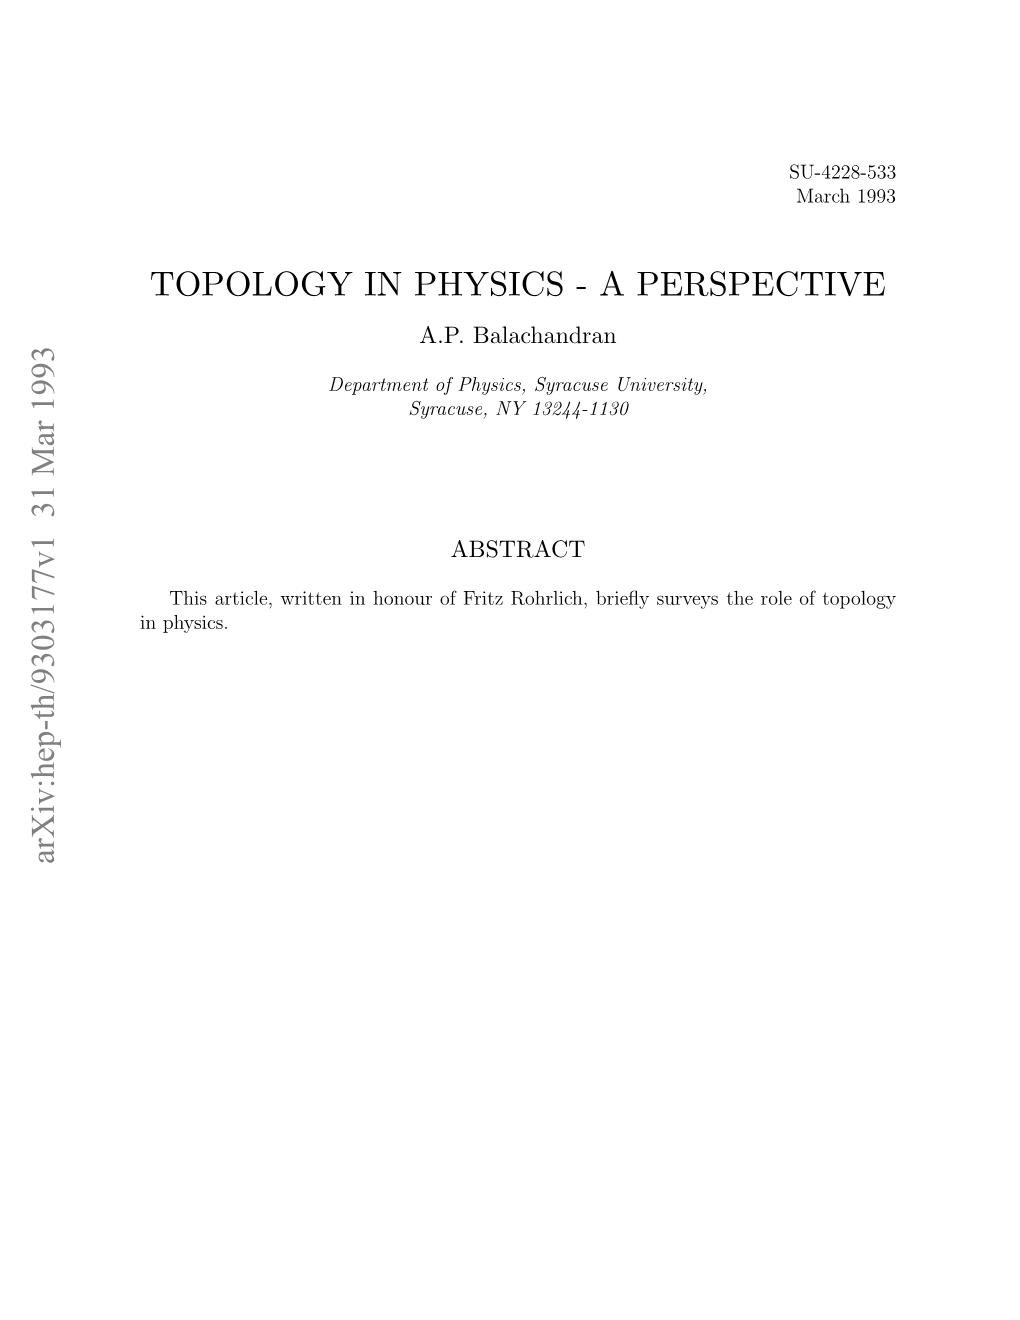 Topology in Physics-A Perspective